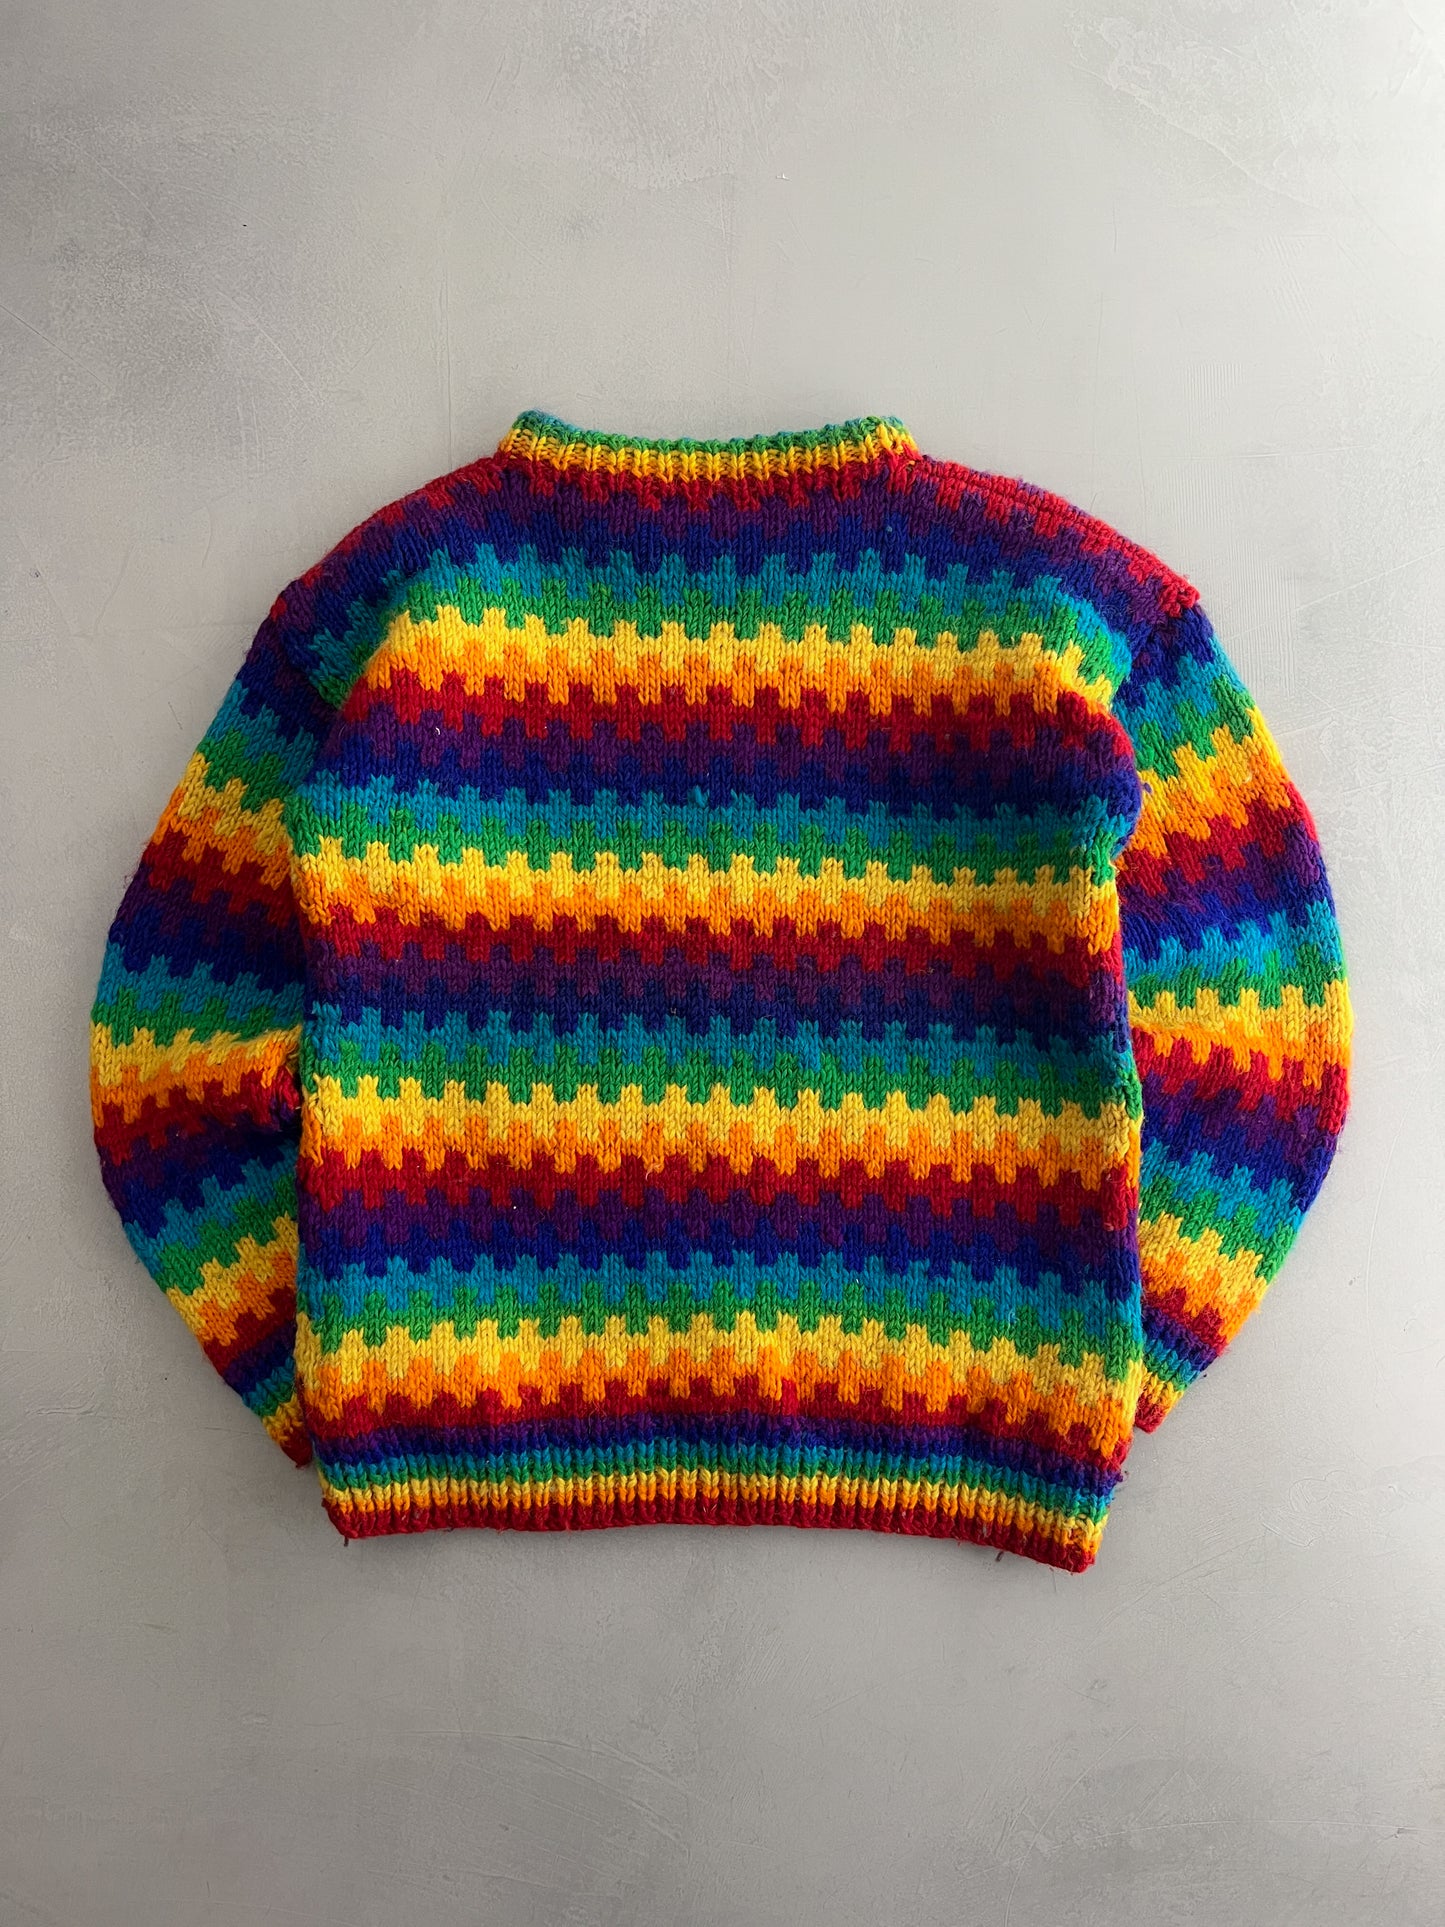 Hand-Knitted Multi-Coloured Sweater [L]